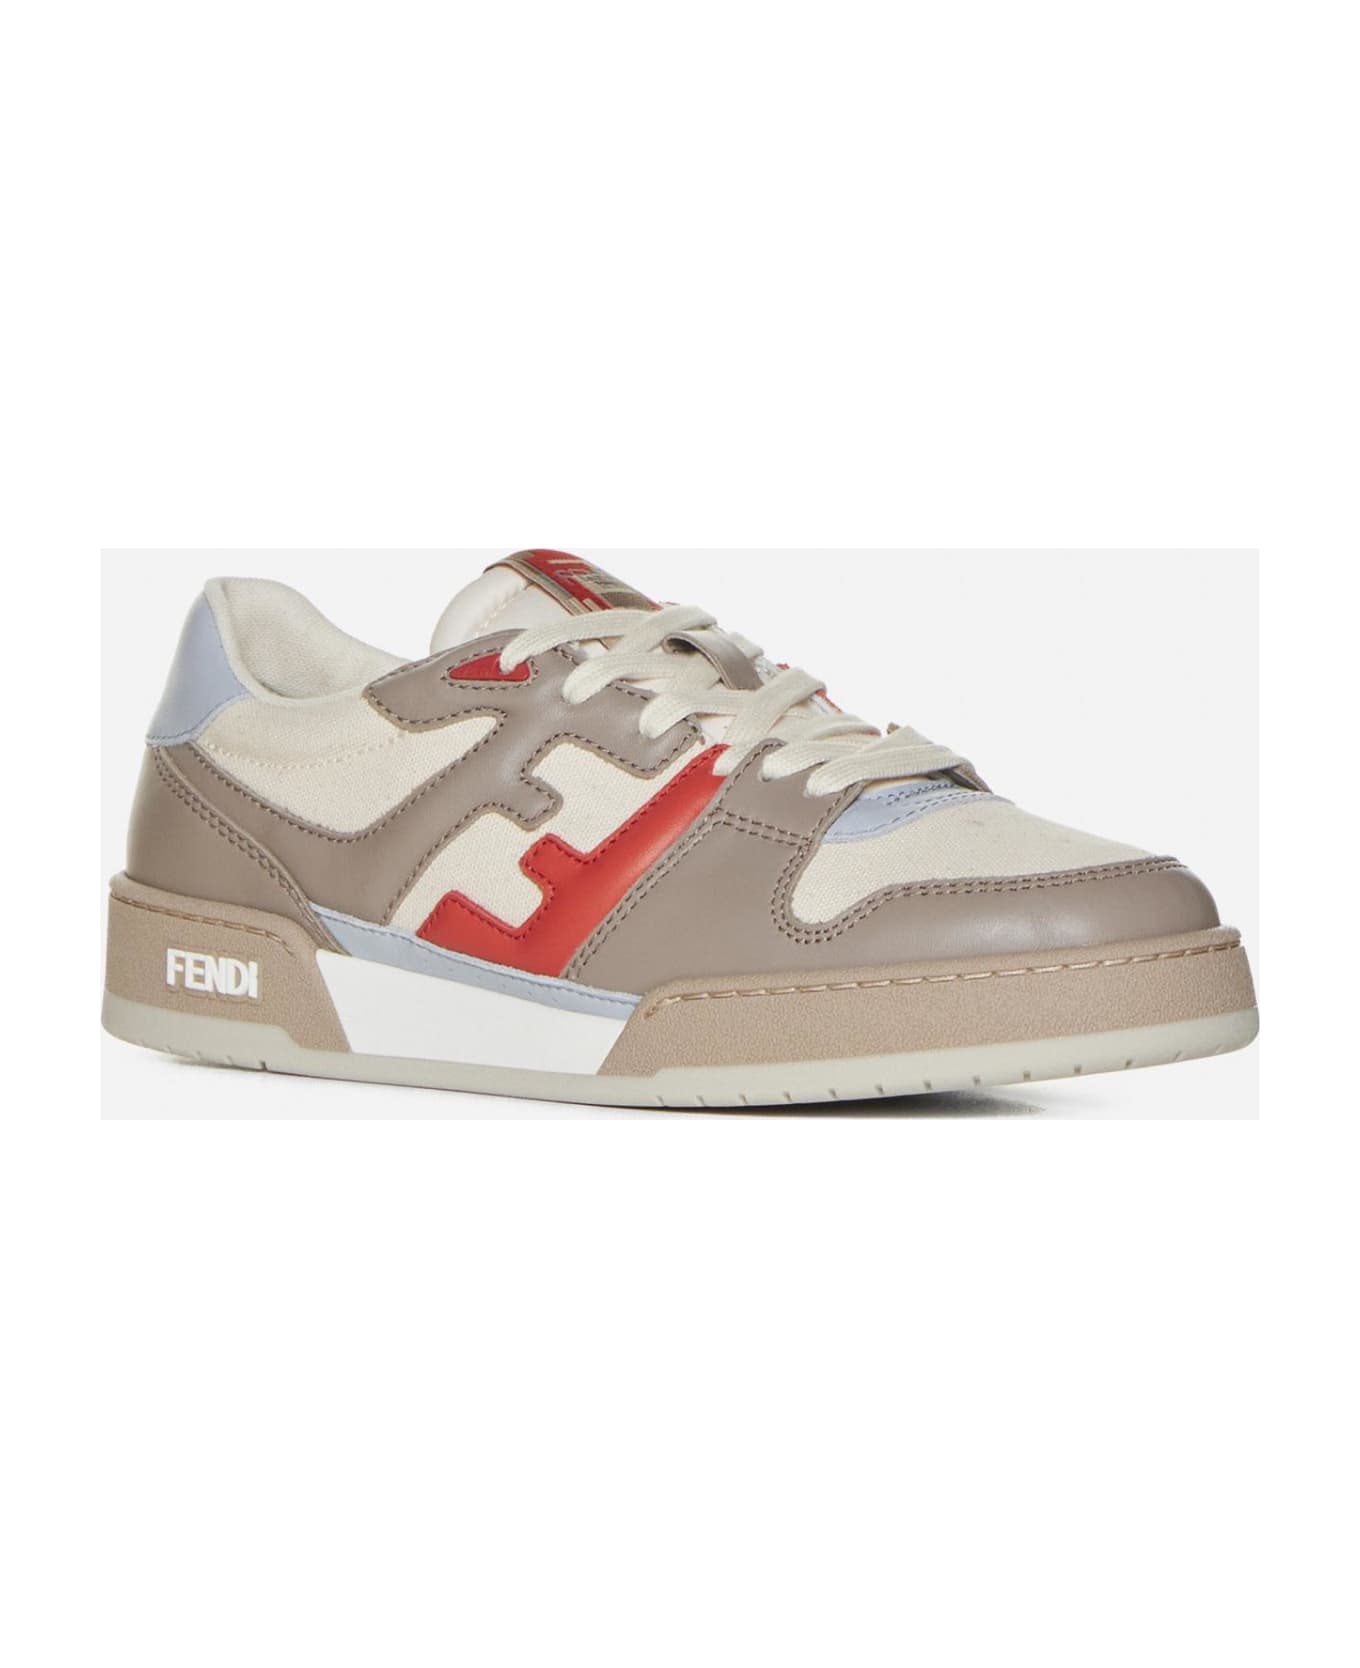 Fendi Match Leather And Fabric Sneakers - Beige スニーカー